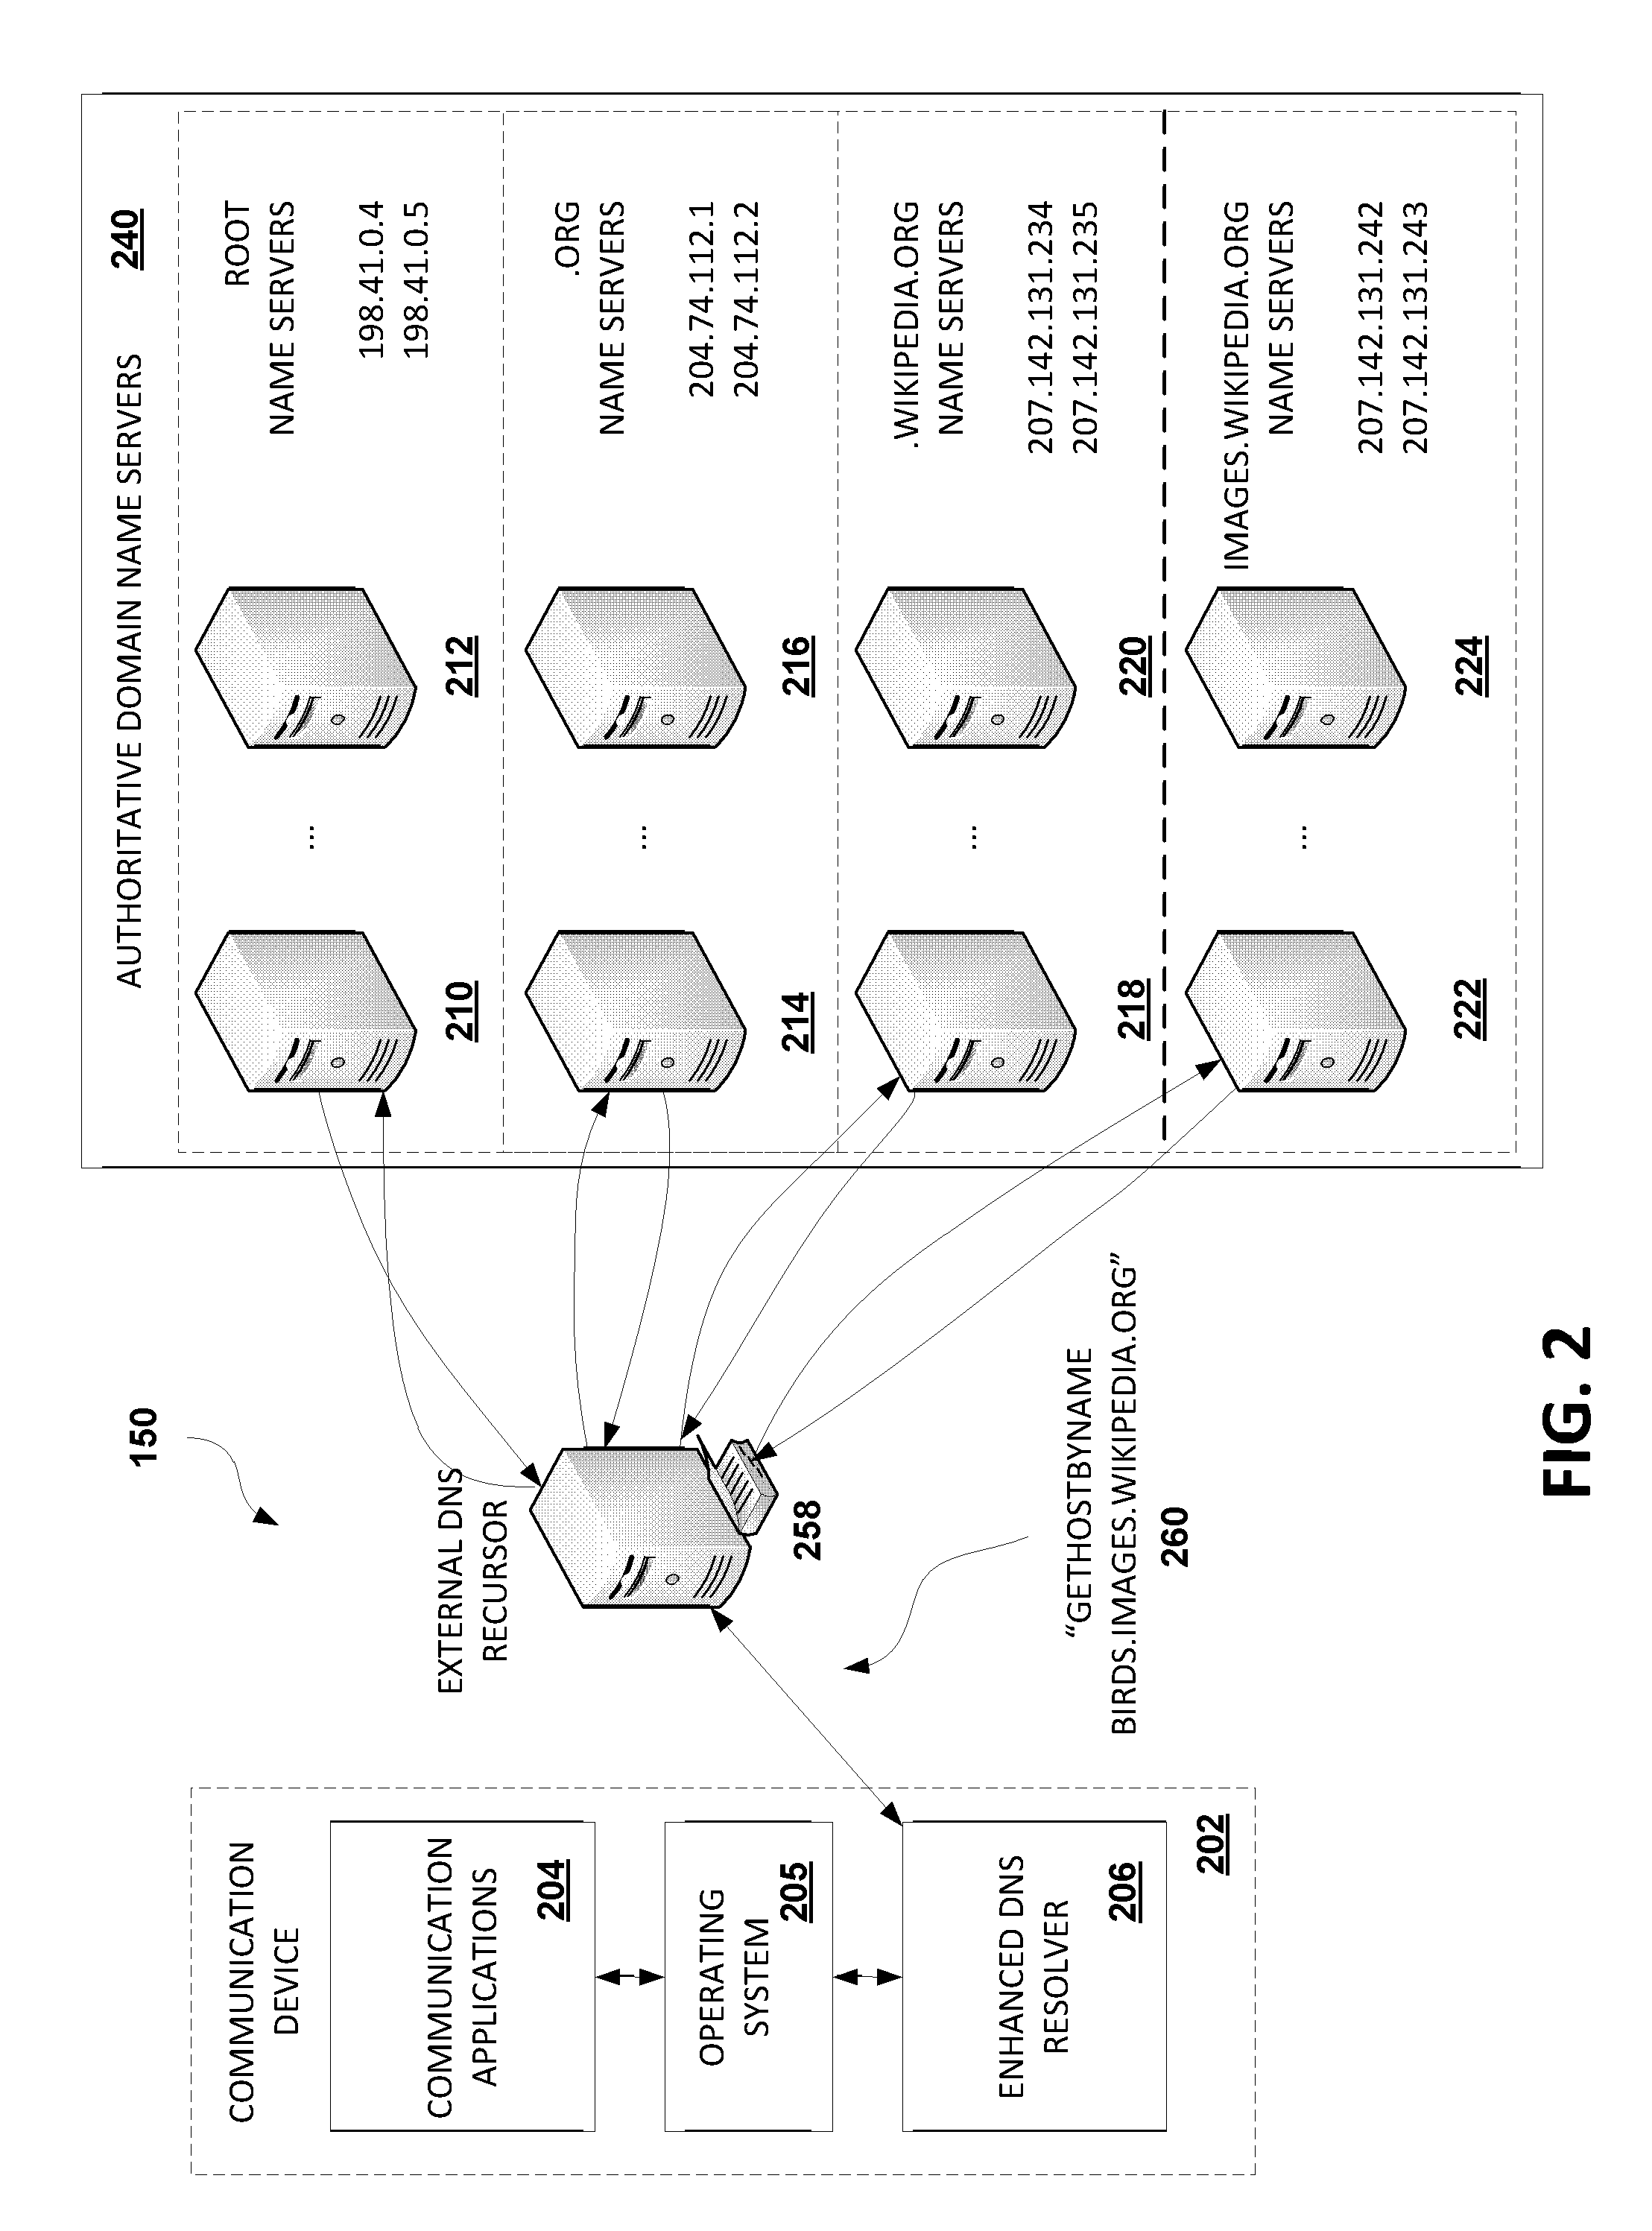 Method and system for increasing speed of domain name system resolution within a computing device